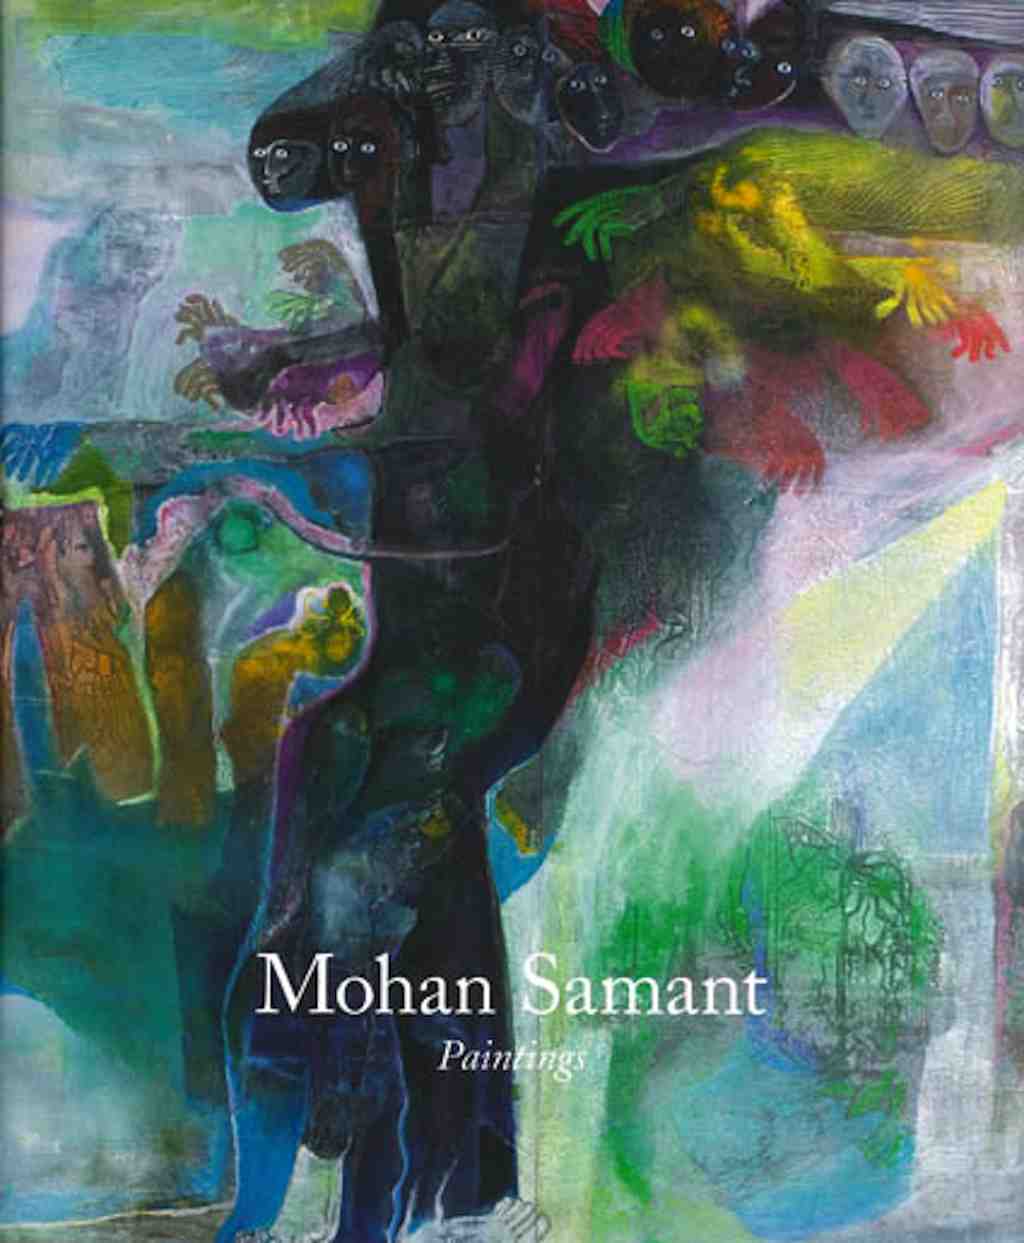 New book and exhibitions on Mohan Samant, his life and paintings